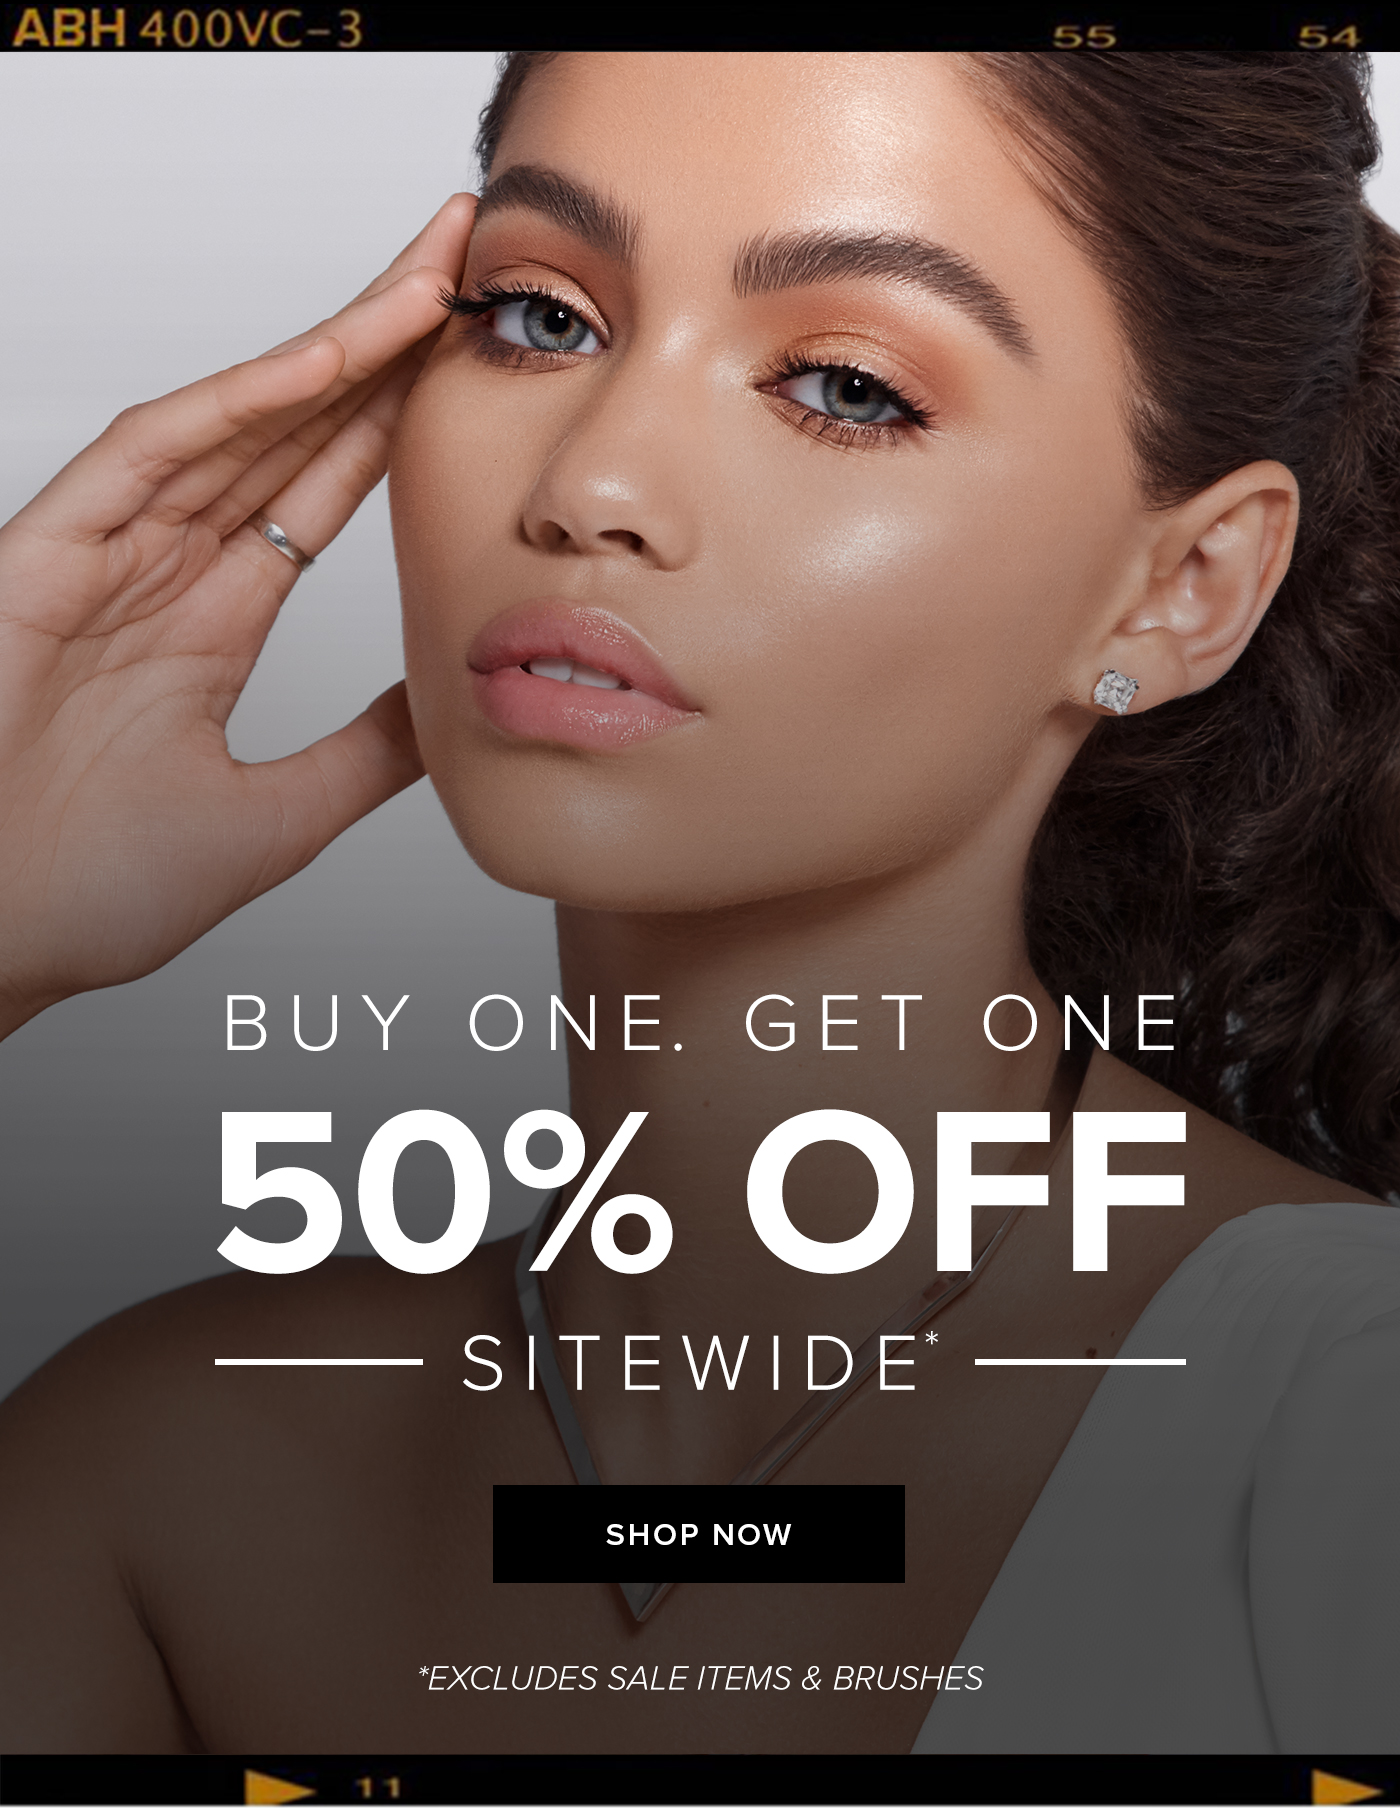 BUY ONE. GET ONE 50% OFF SITEWIDE SHOP NOW. *EXCLUDES SALE ITEMS & BRUSHES